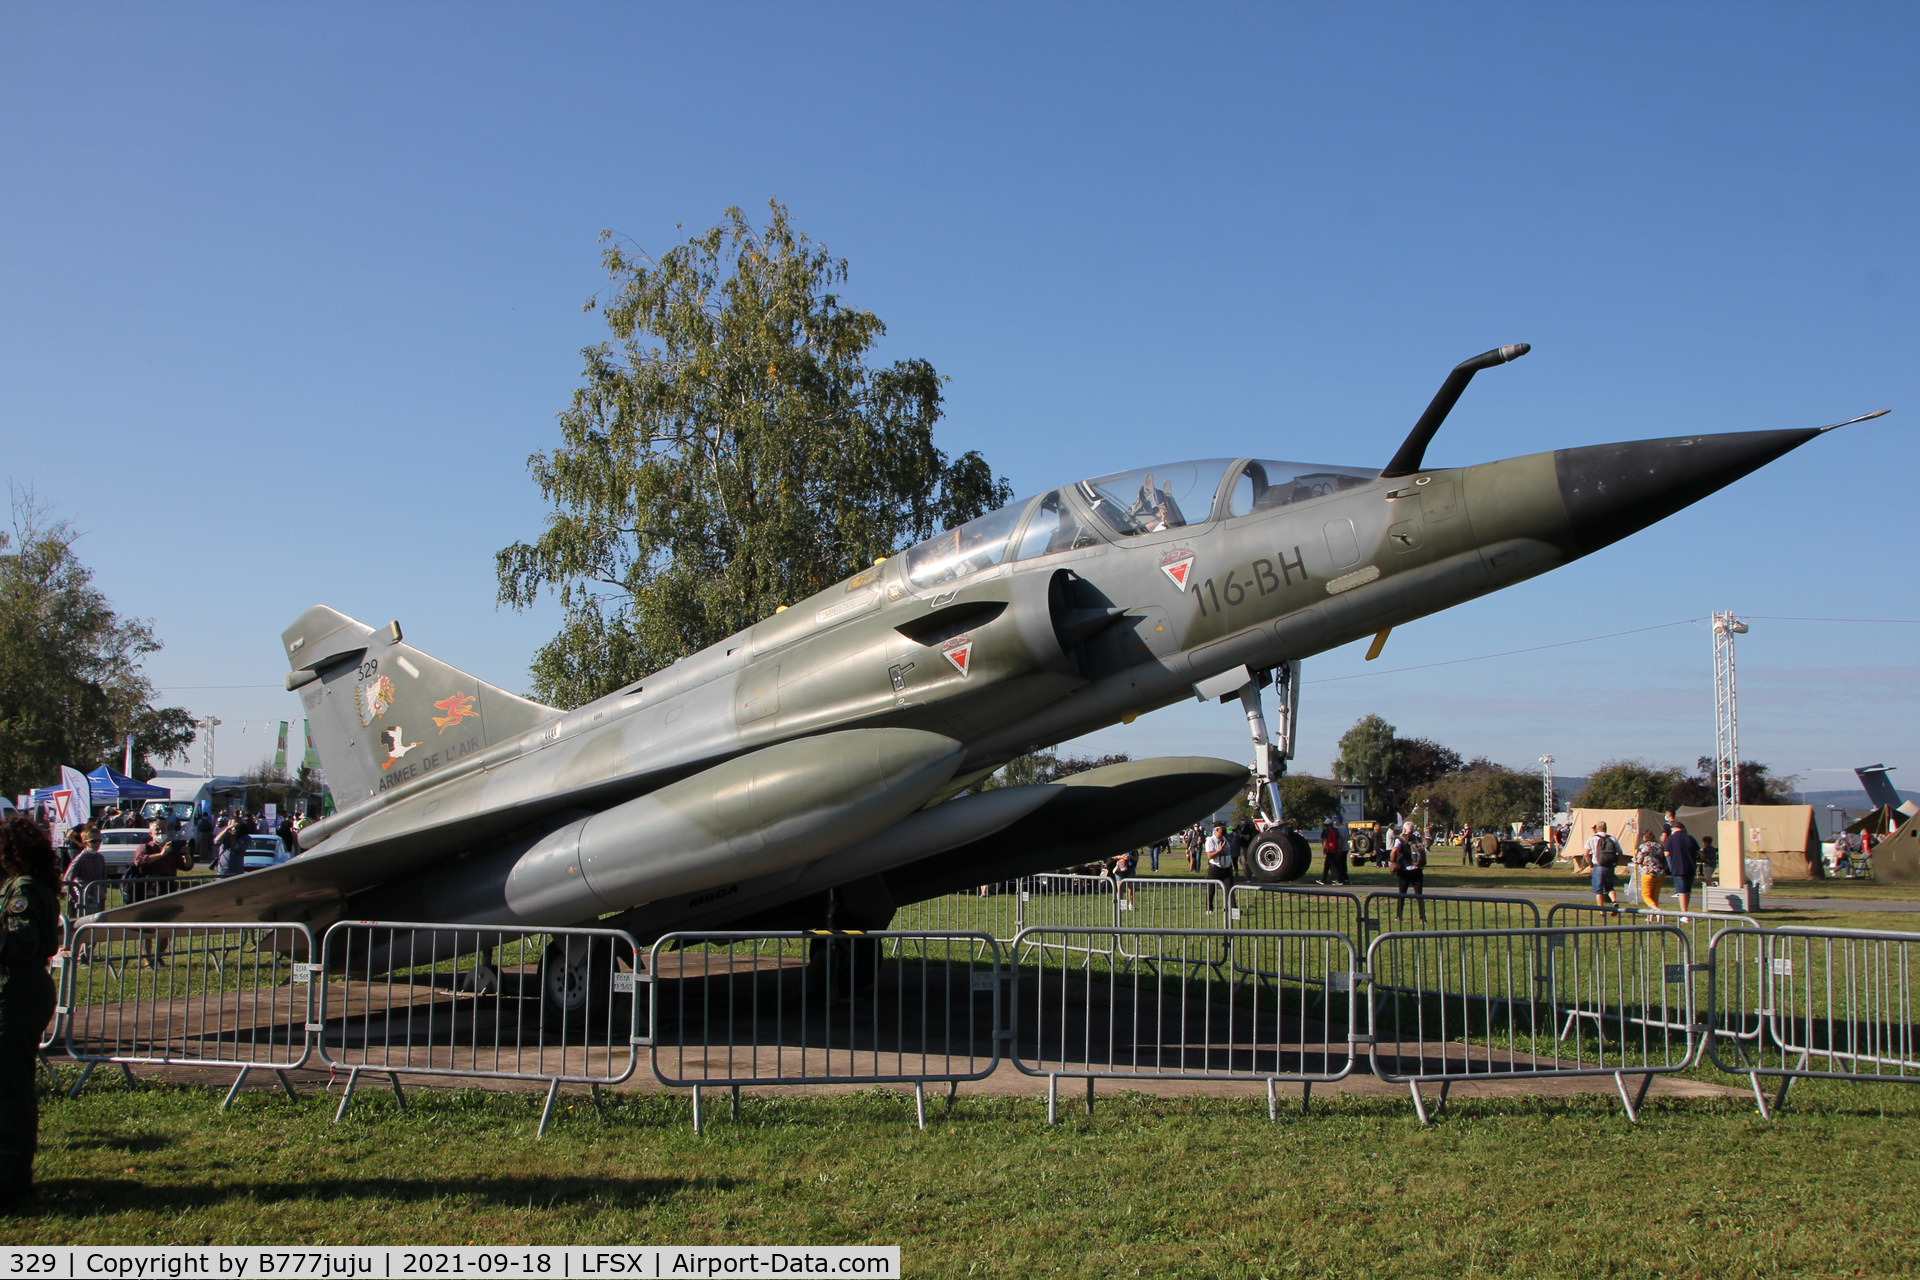 329, 1988 Dassault Mirage 2000N C/N 243, during Luxeuil Air Show 2021